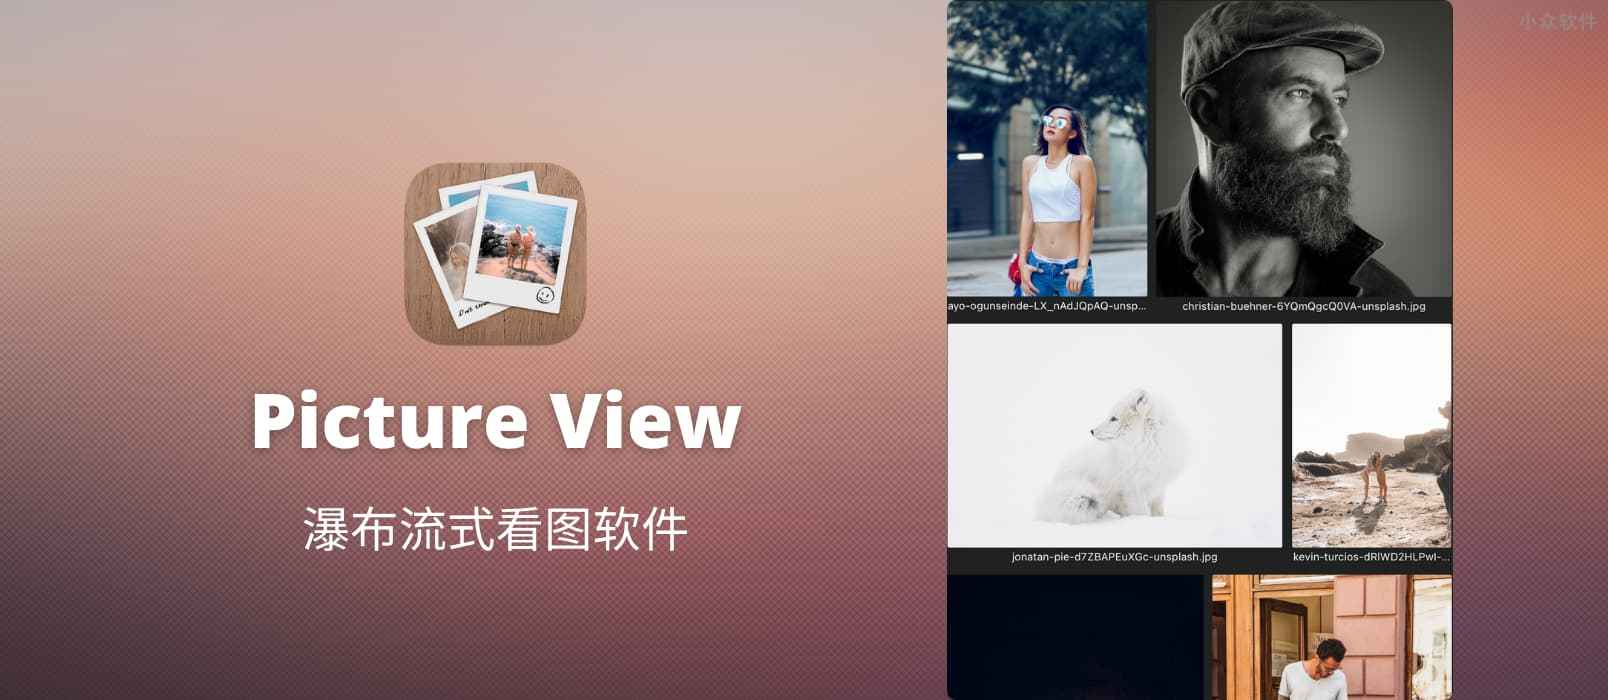 Picture View - 7.9MB 轻量级 macOS 看图软件，非常有特色的瀑布流式看图模式 1